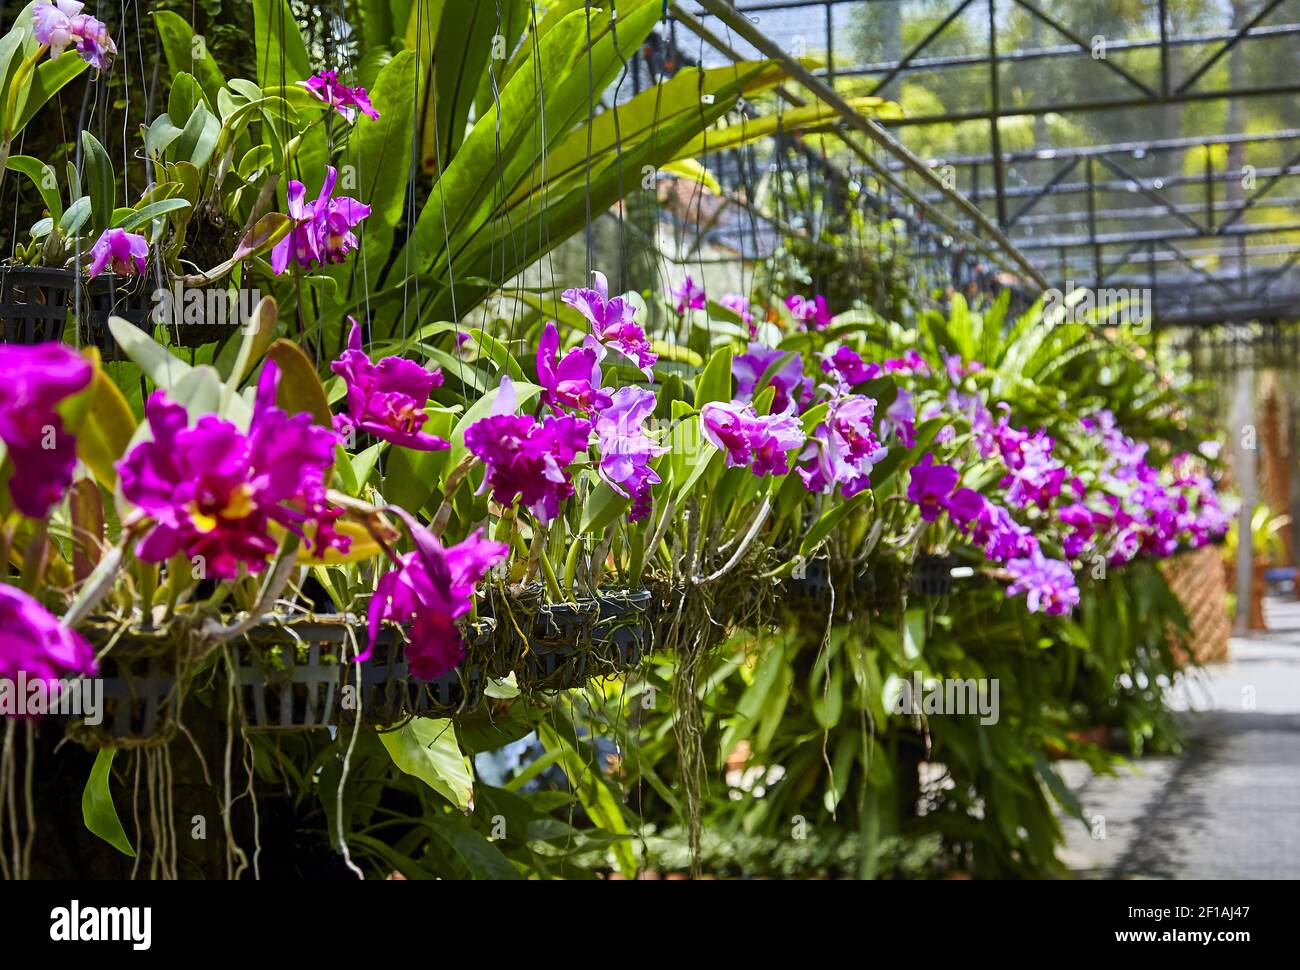 Purple orchids, Violet orchids. Orchid is queen of flowers. Orchid in tropical garden. Orchid in nature. Stock Photo